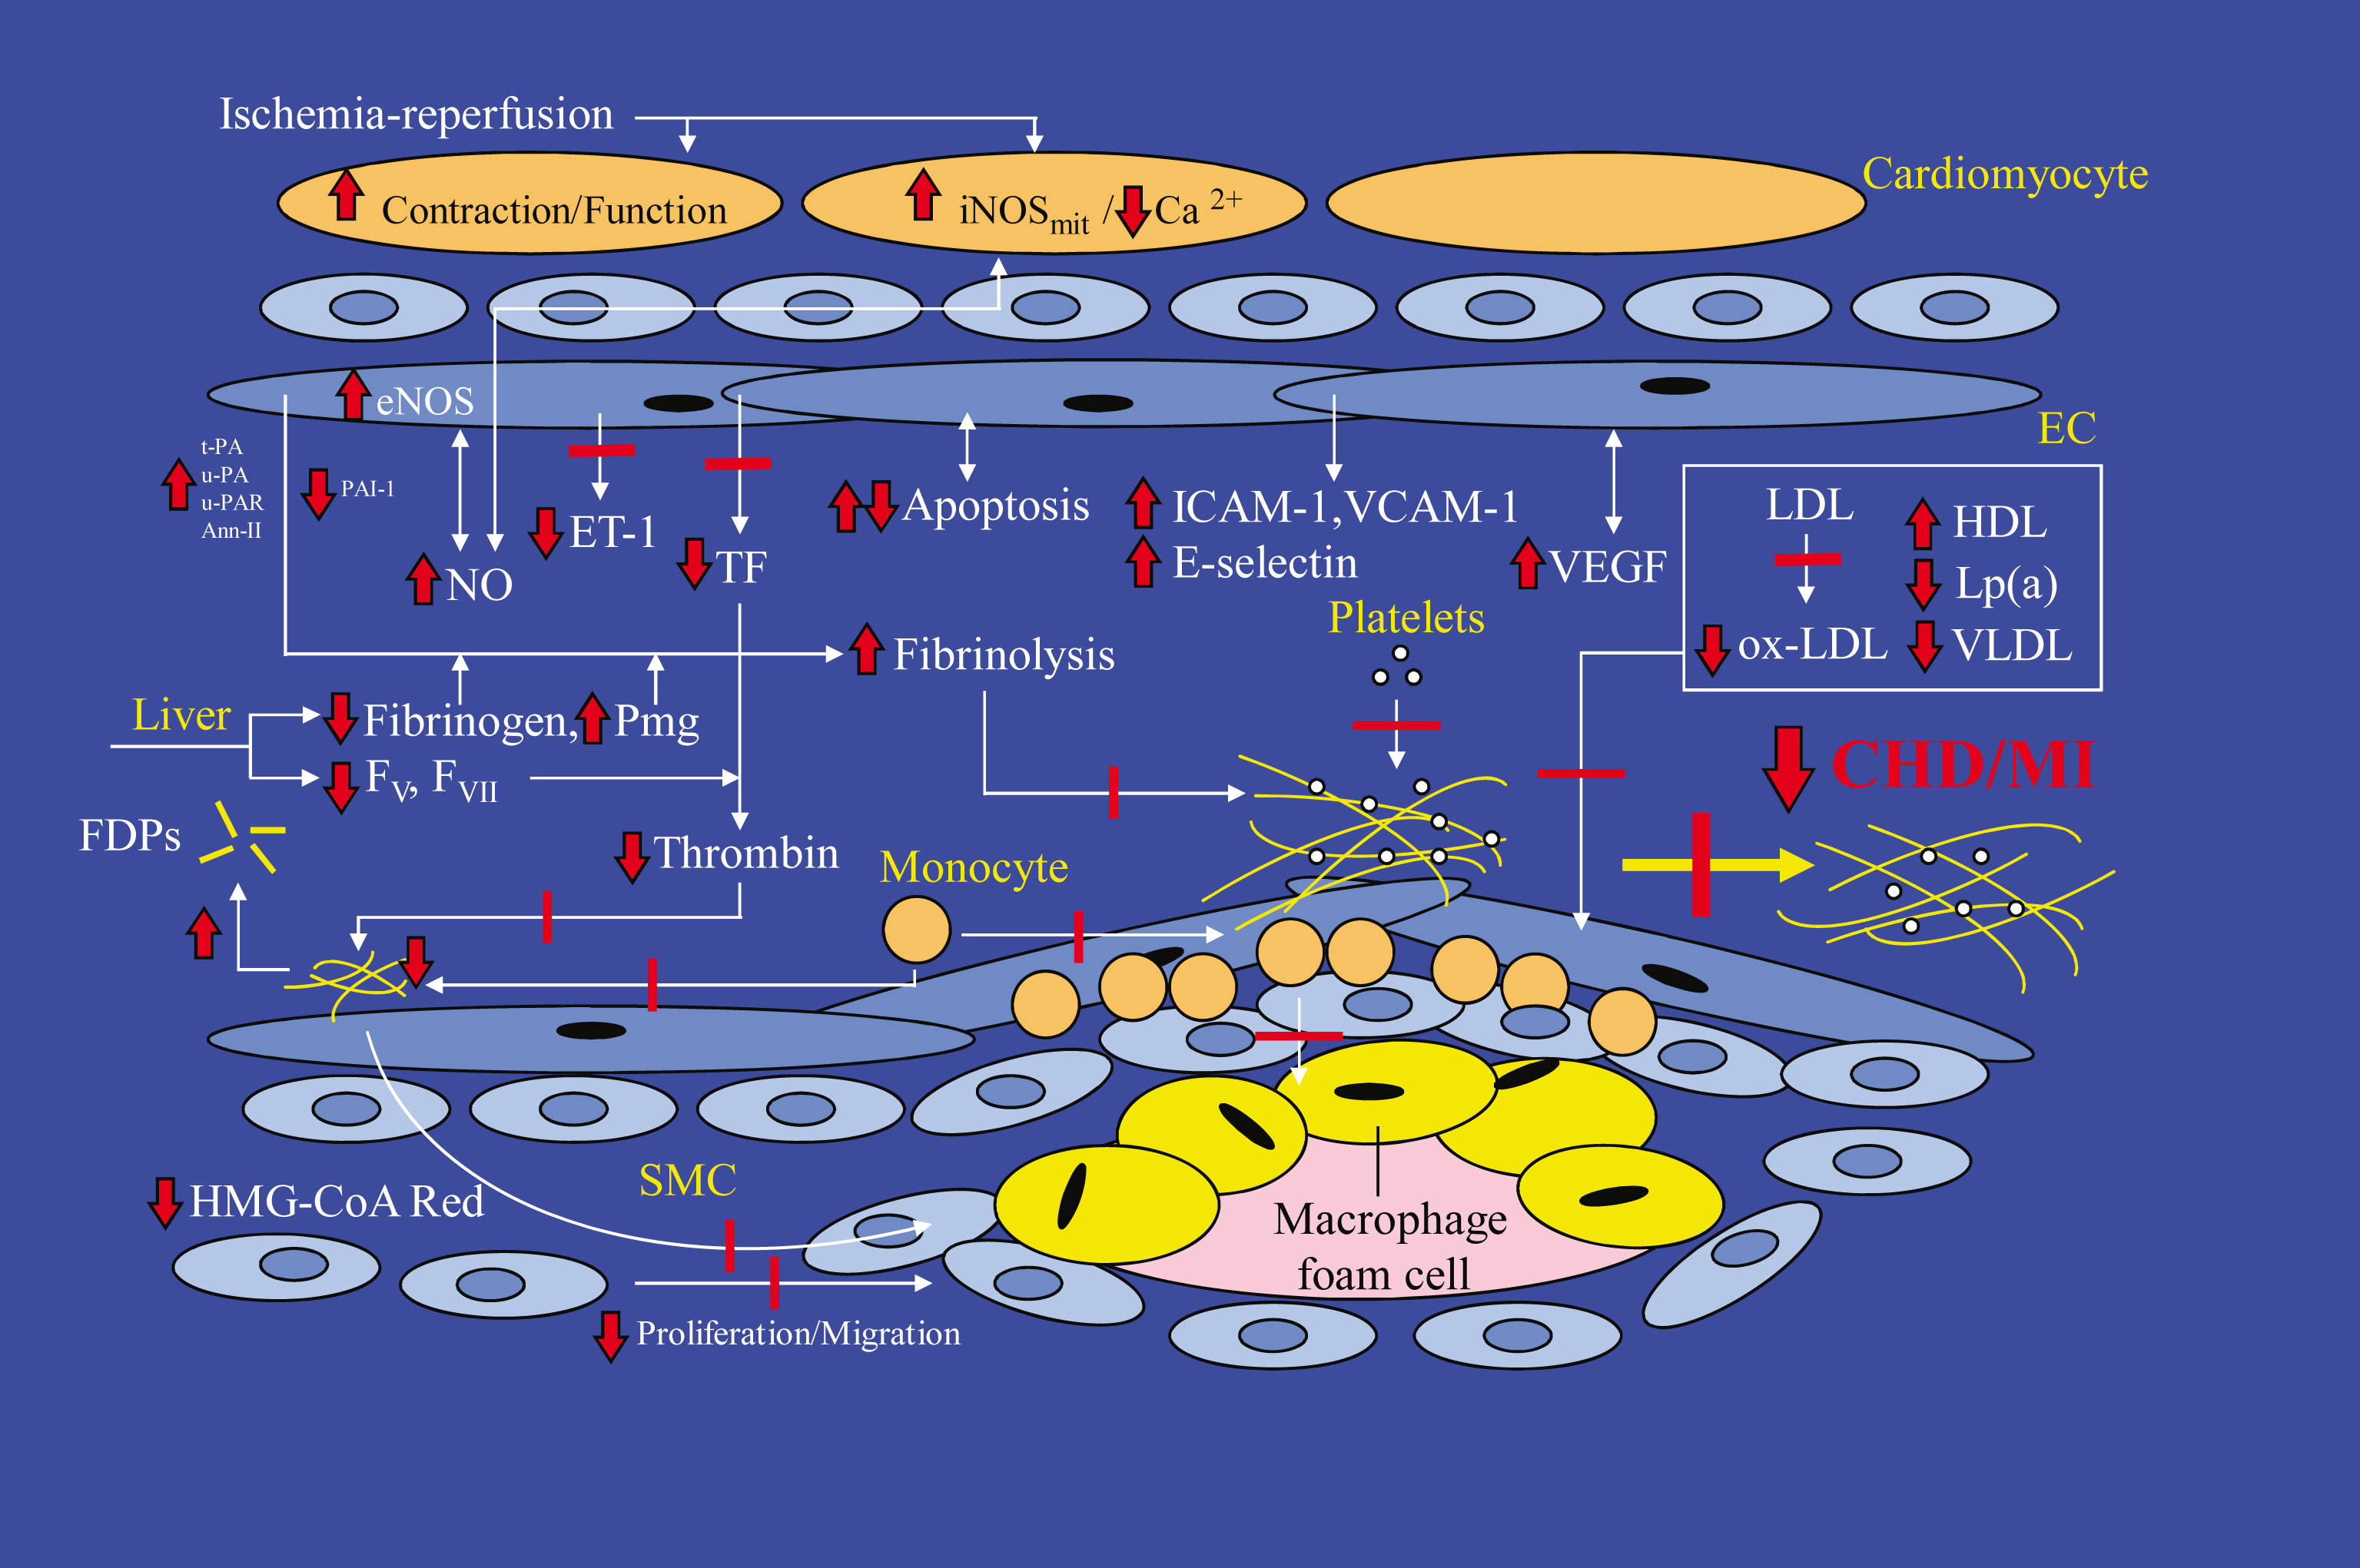 Proposed cardioprotective mechanisms of the alcohol and the phenolic compound components of wine following regular moderate consumption. Reproduced with permission from Dr F.M. Booyse, Division of Cardiovascular Disease, University of Alabama at Birmingham, Alabama, USA.